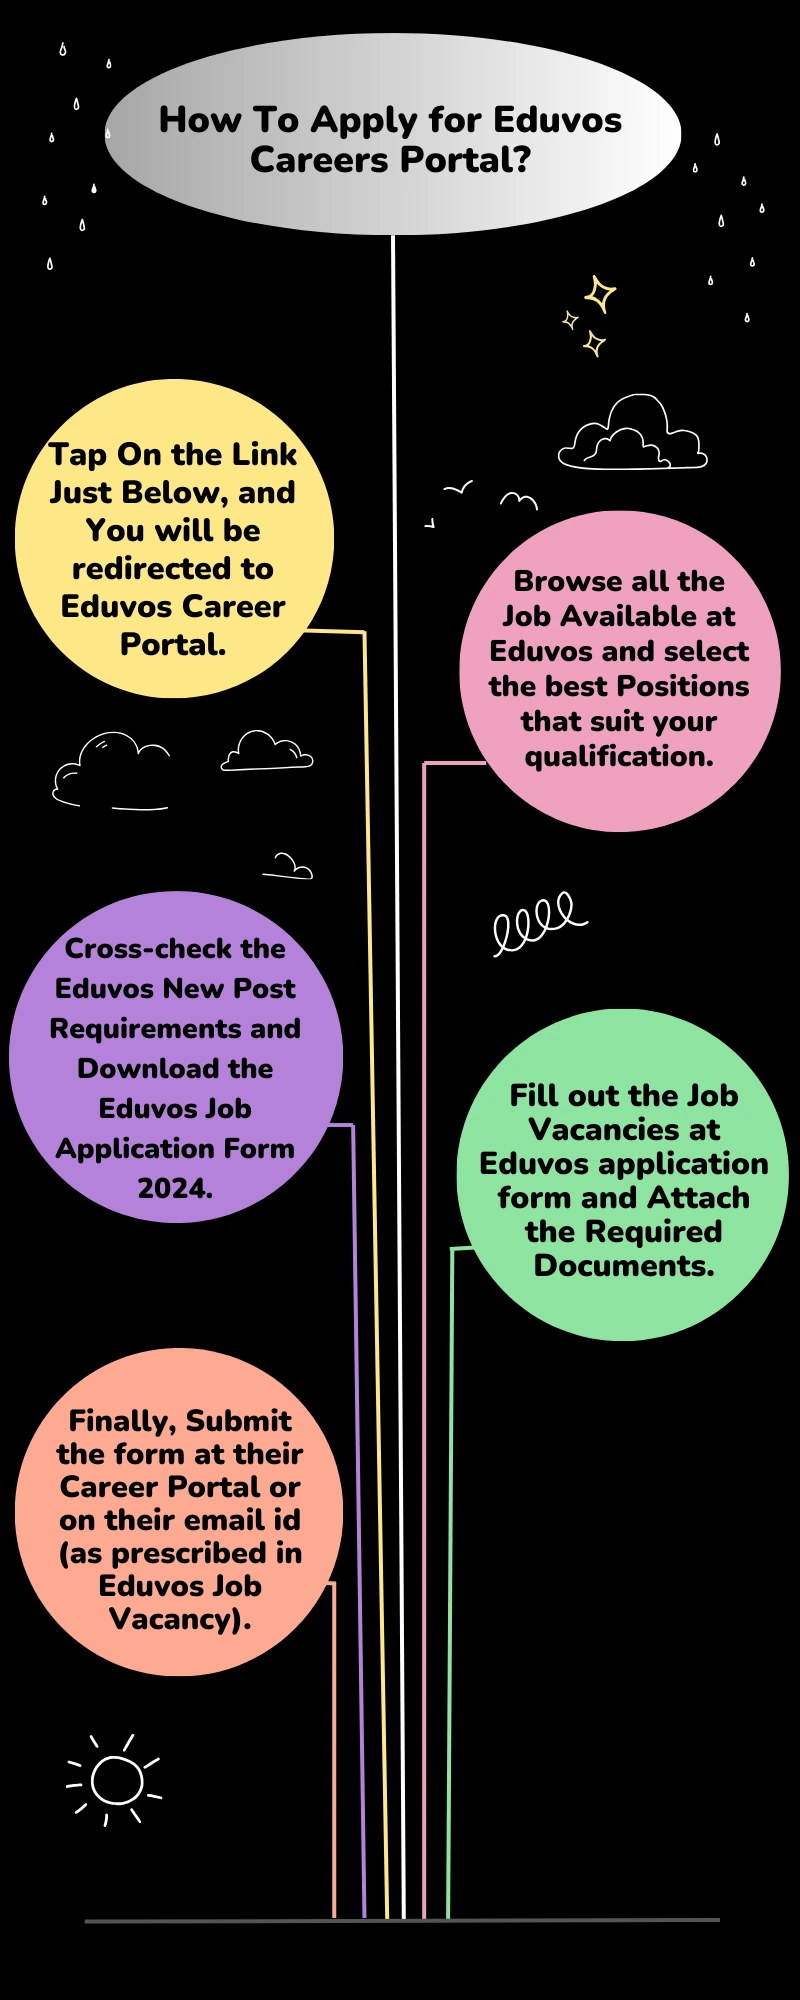 How To Apply for Eduvos Careers Portal?